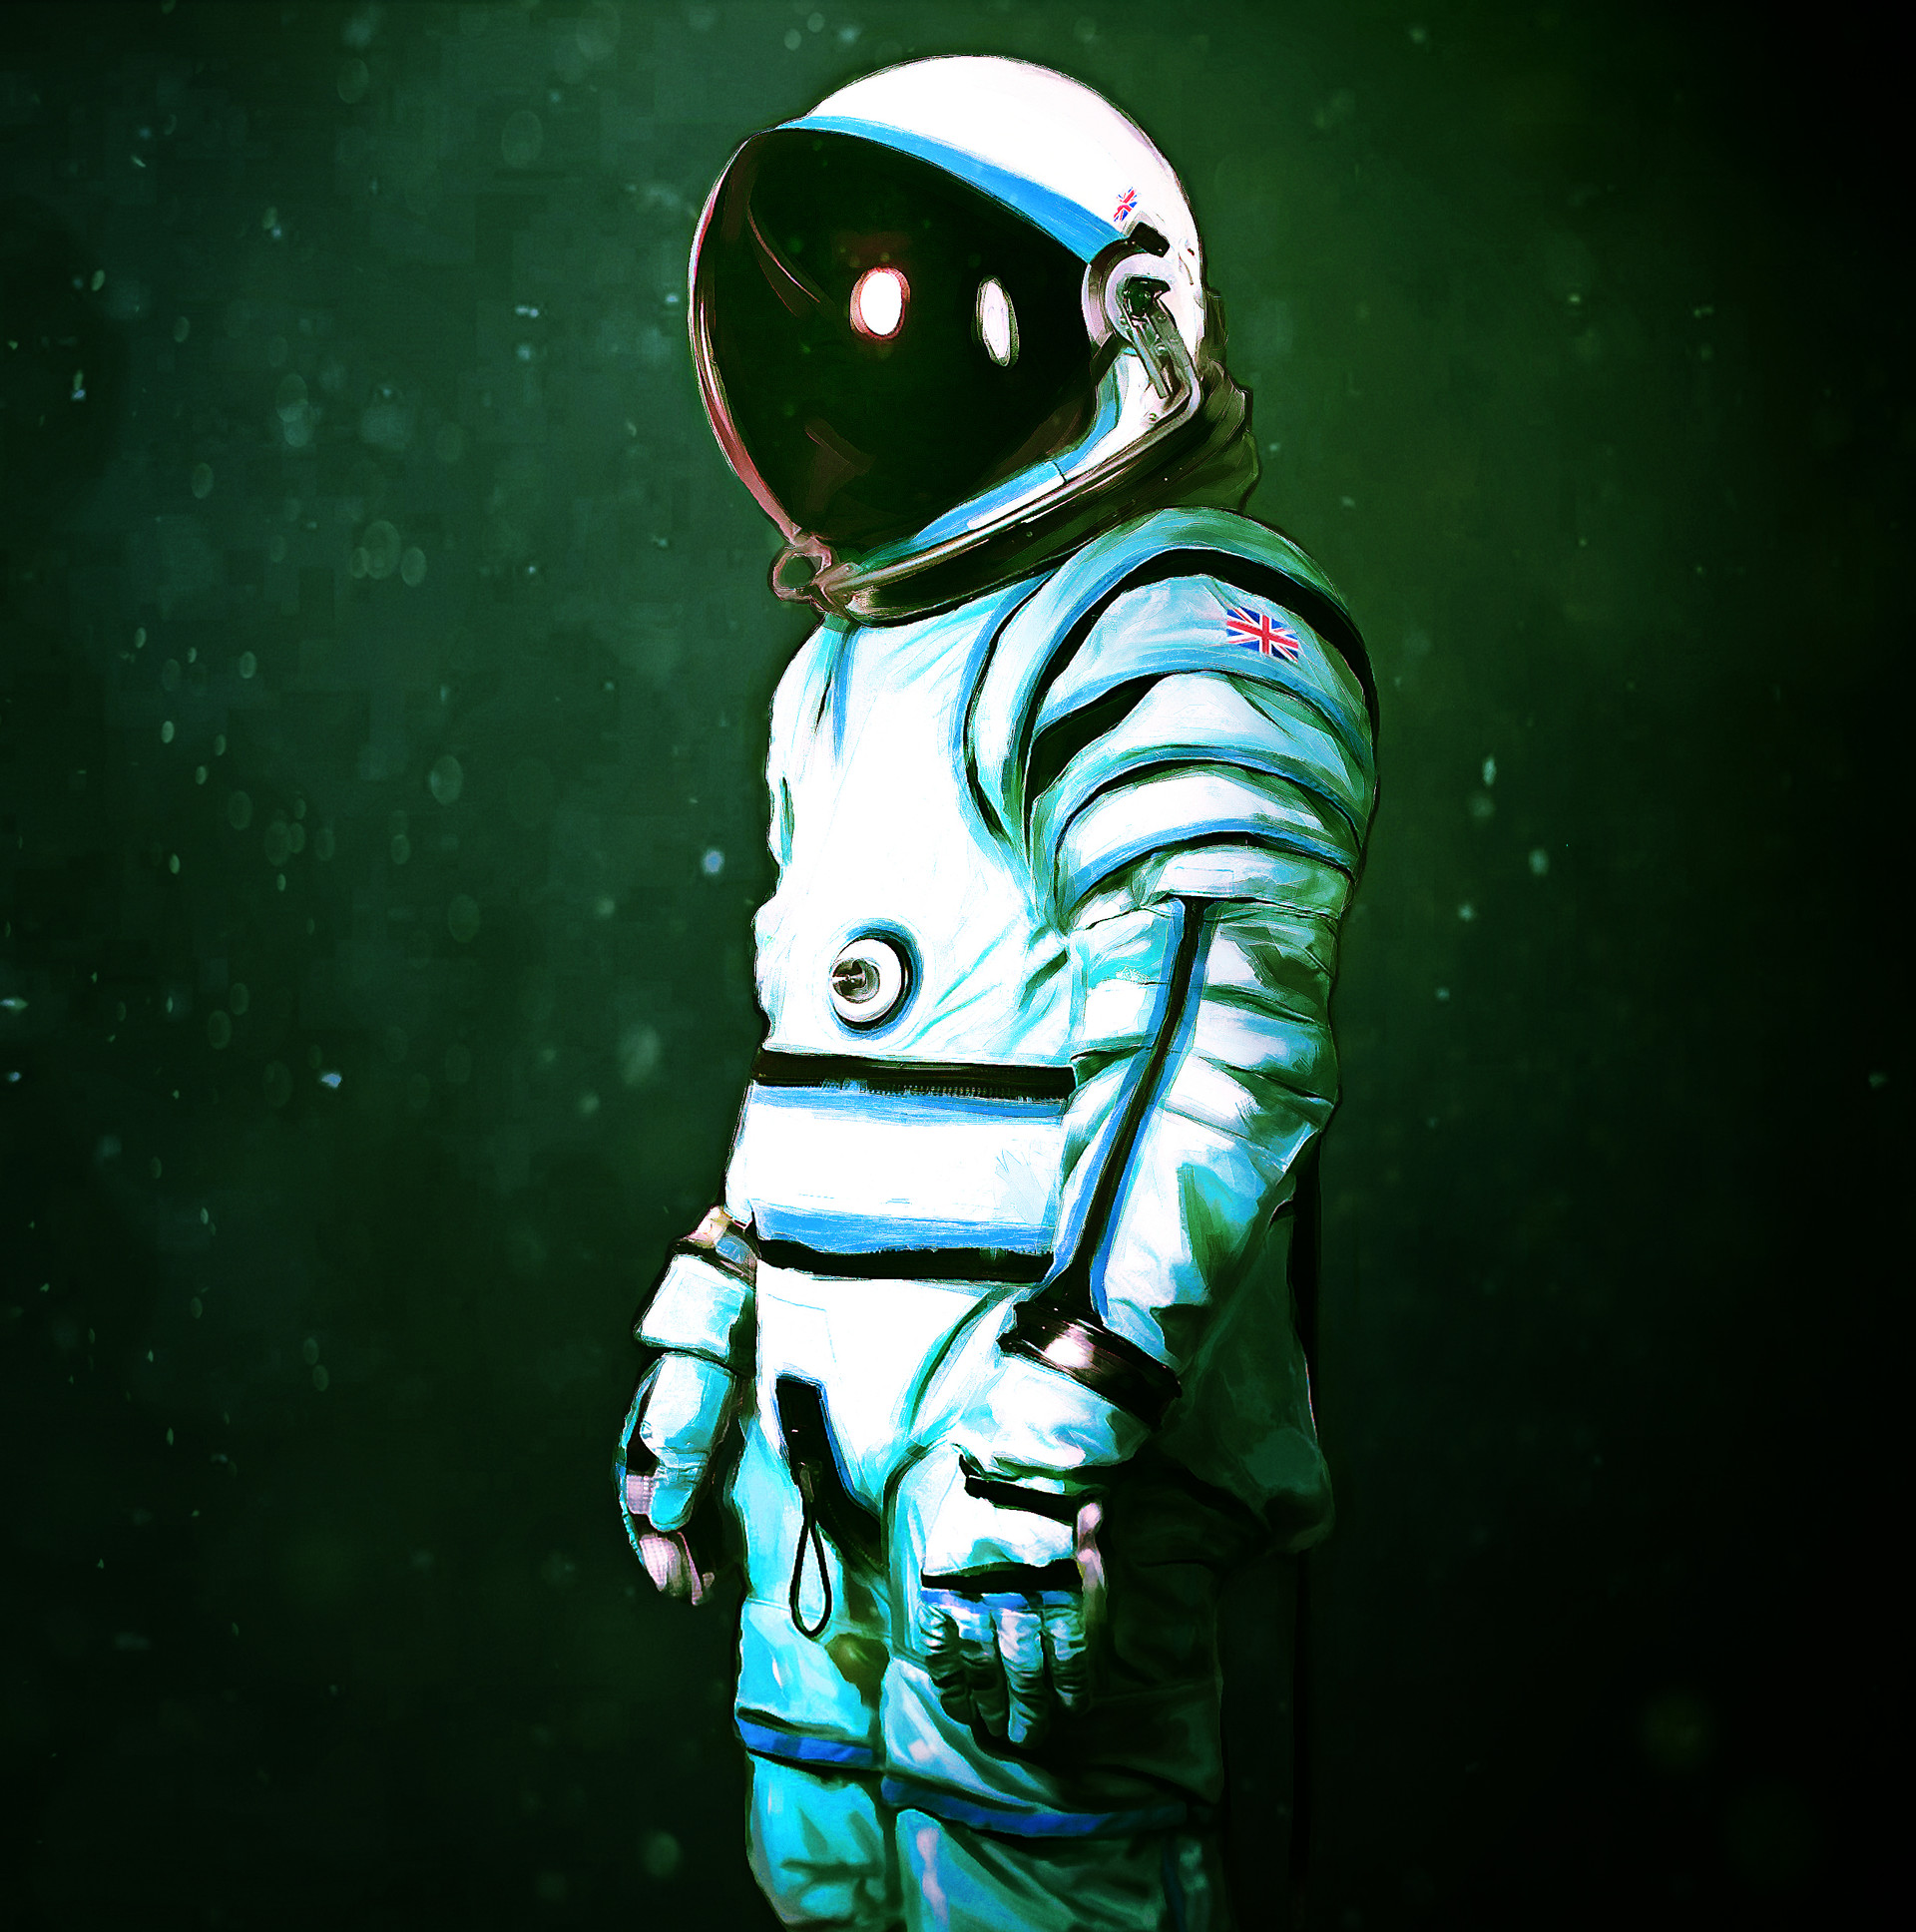 Space Man speed Paint.